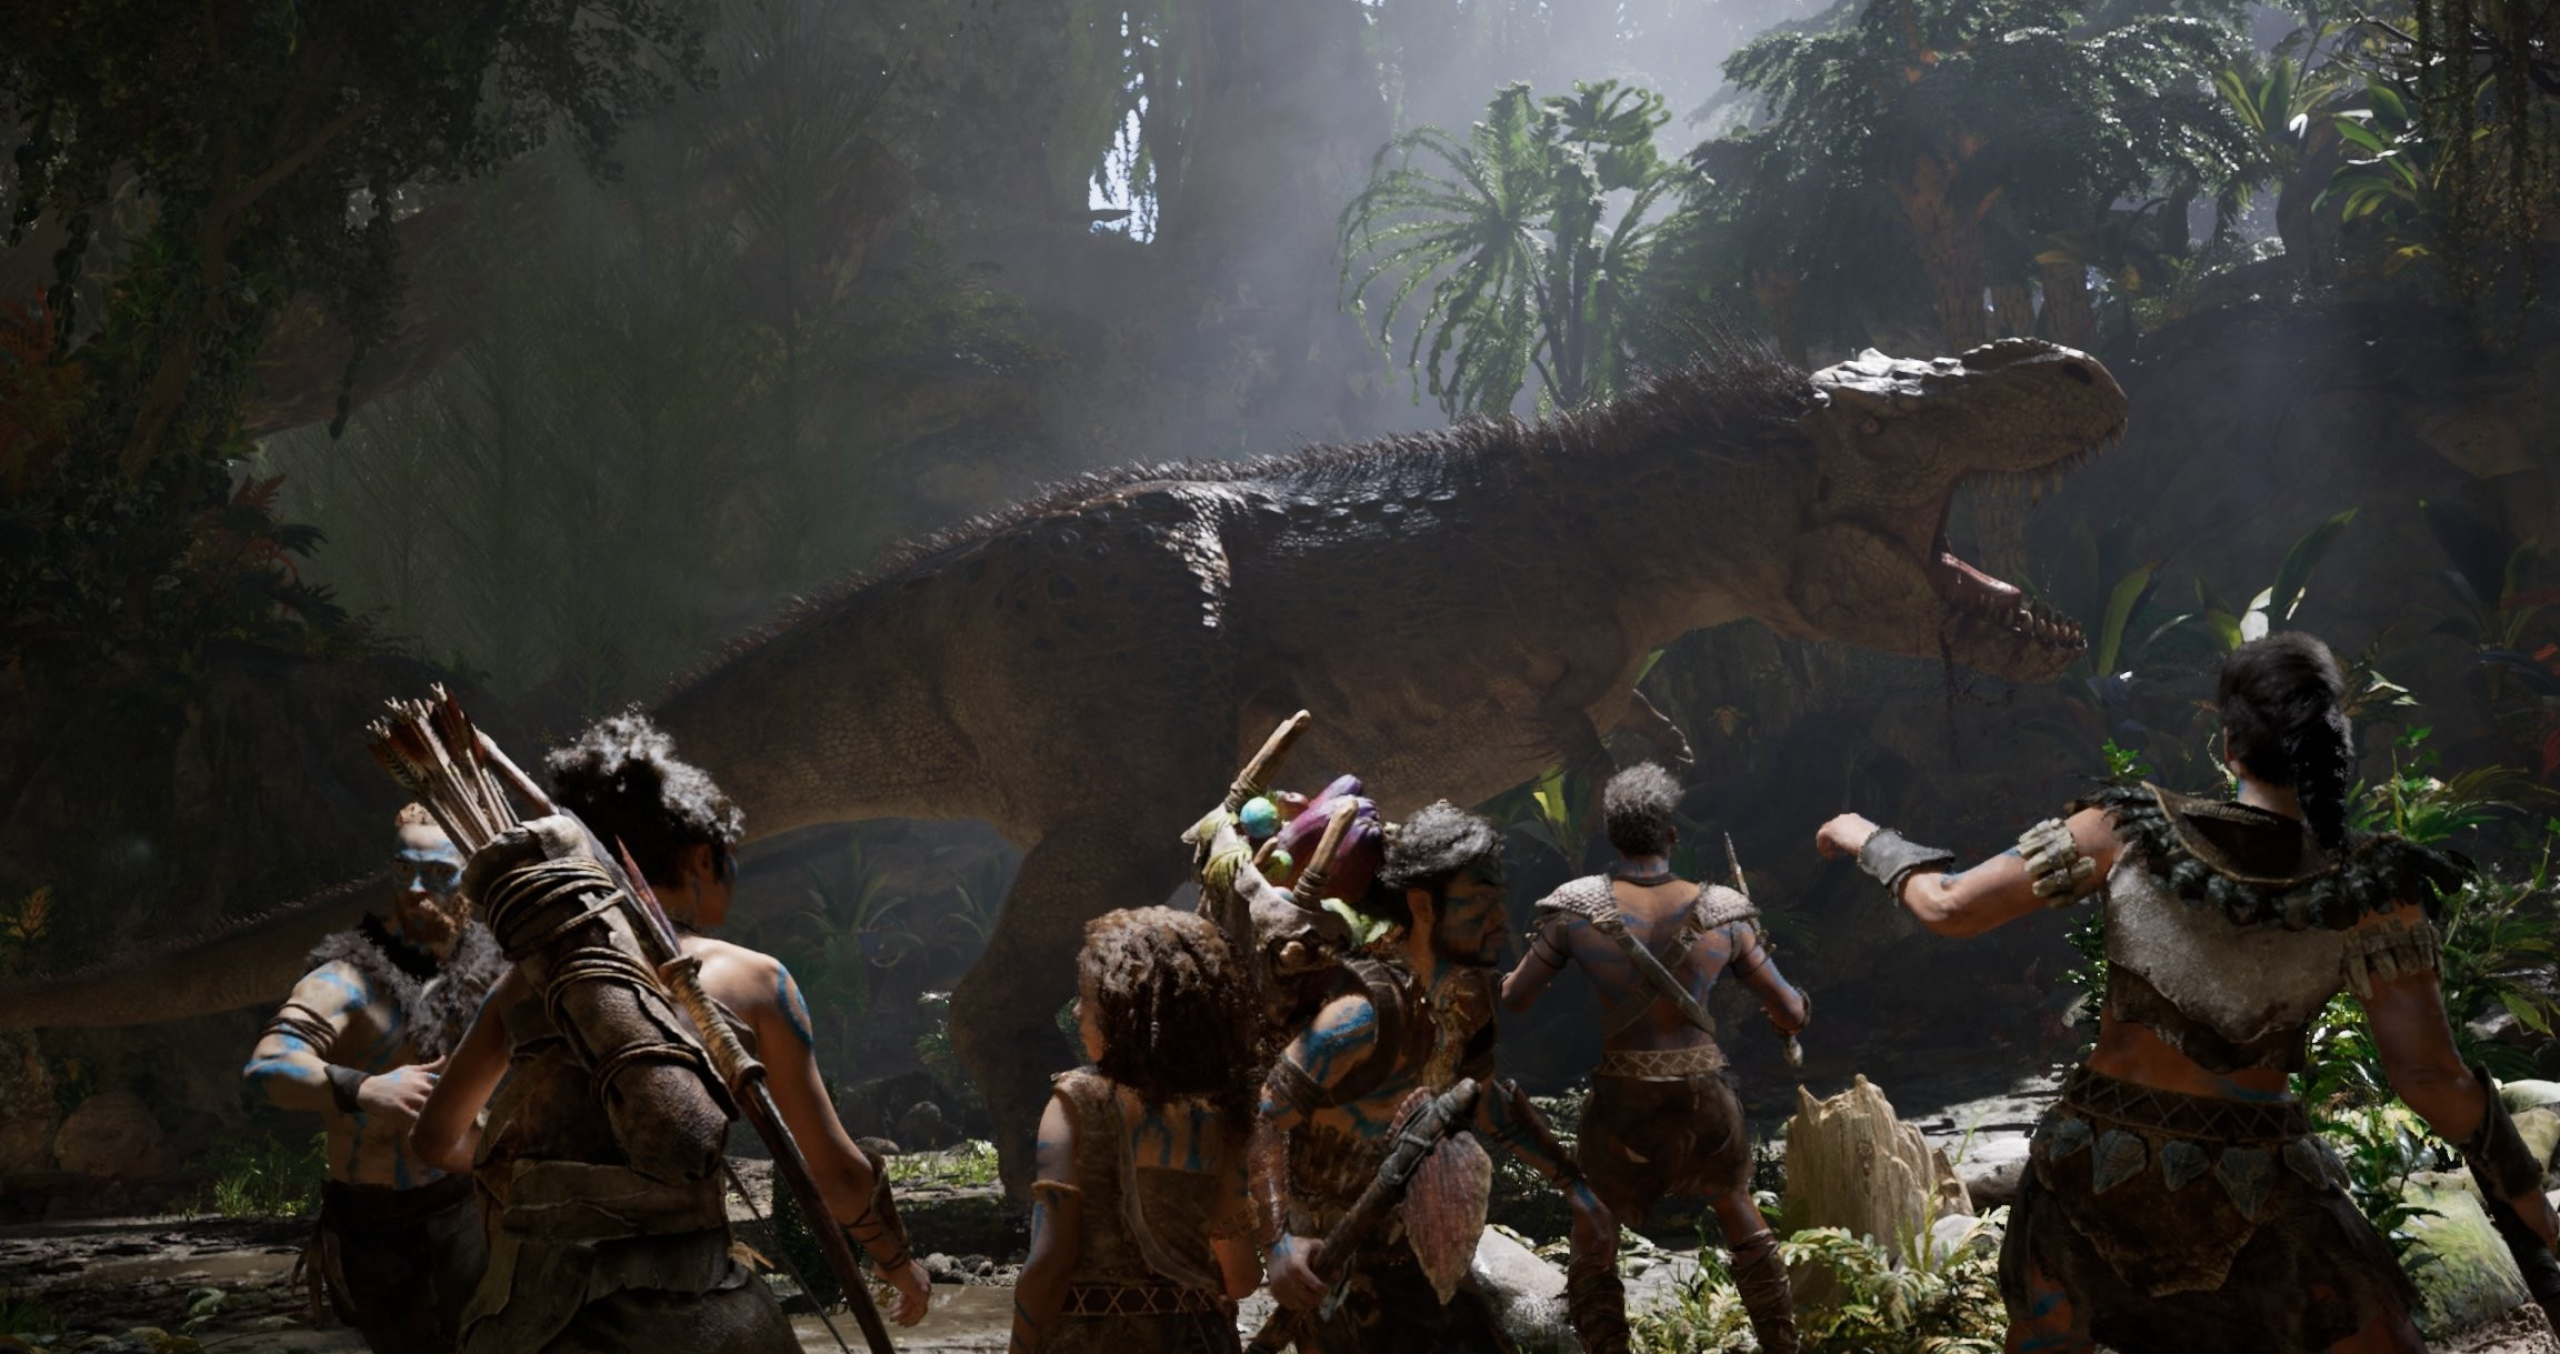 Ark II (Game): Video game, announced at the Game Awards, December 10, 2020. 2560x1360 HD Wallpaper.